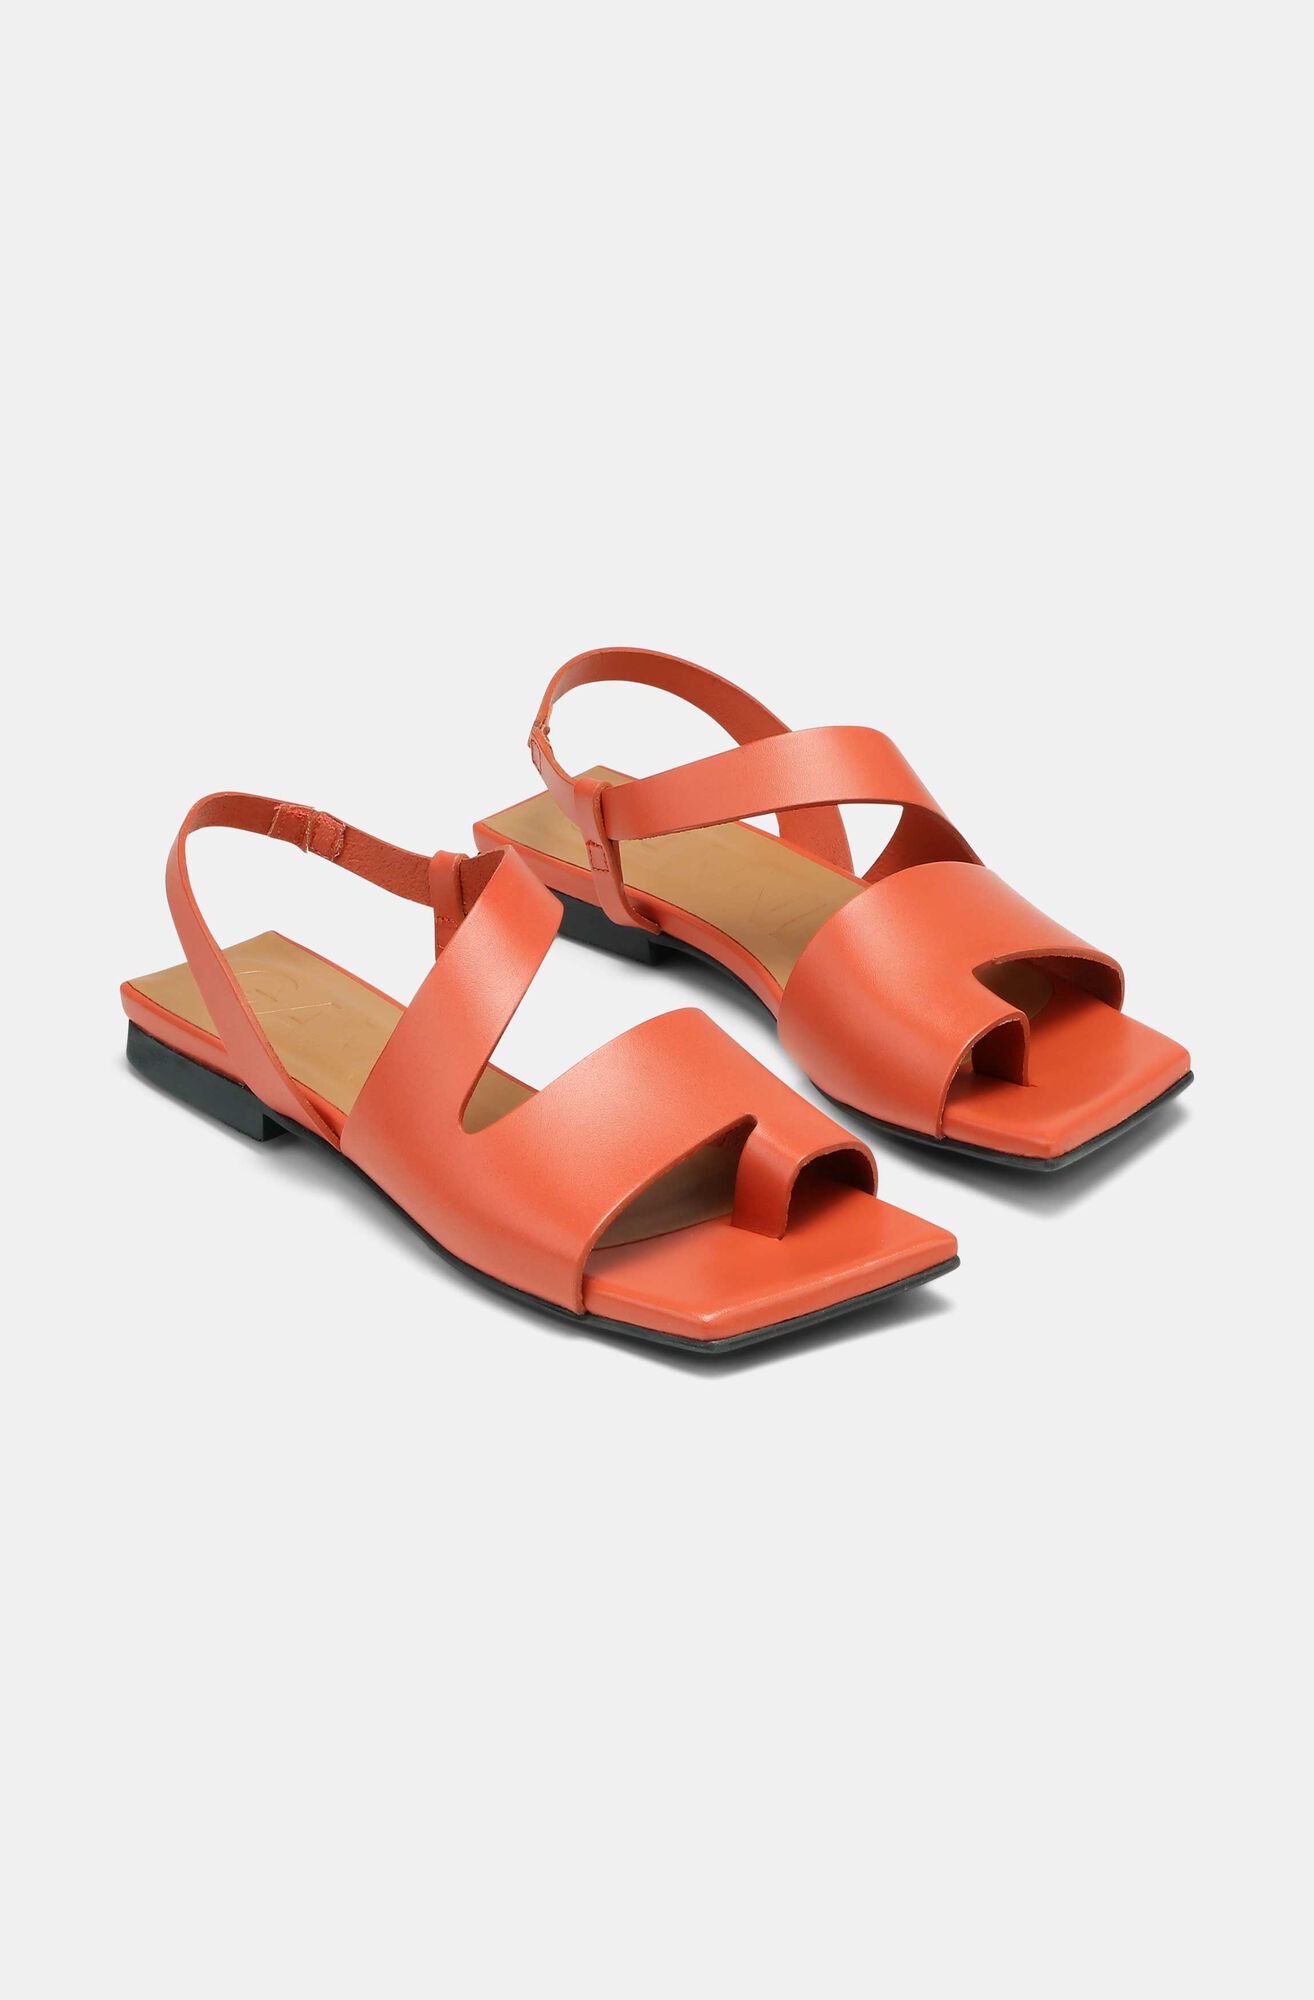 STRAPPY SANDALS
